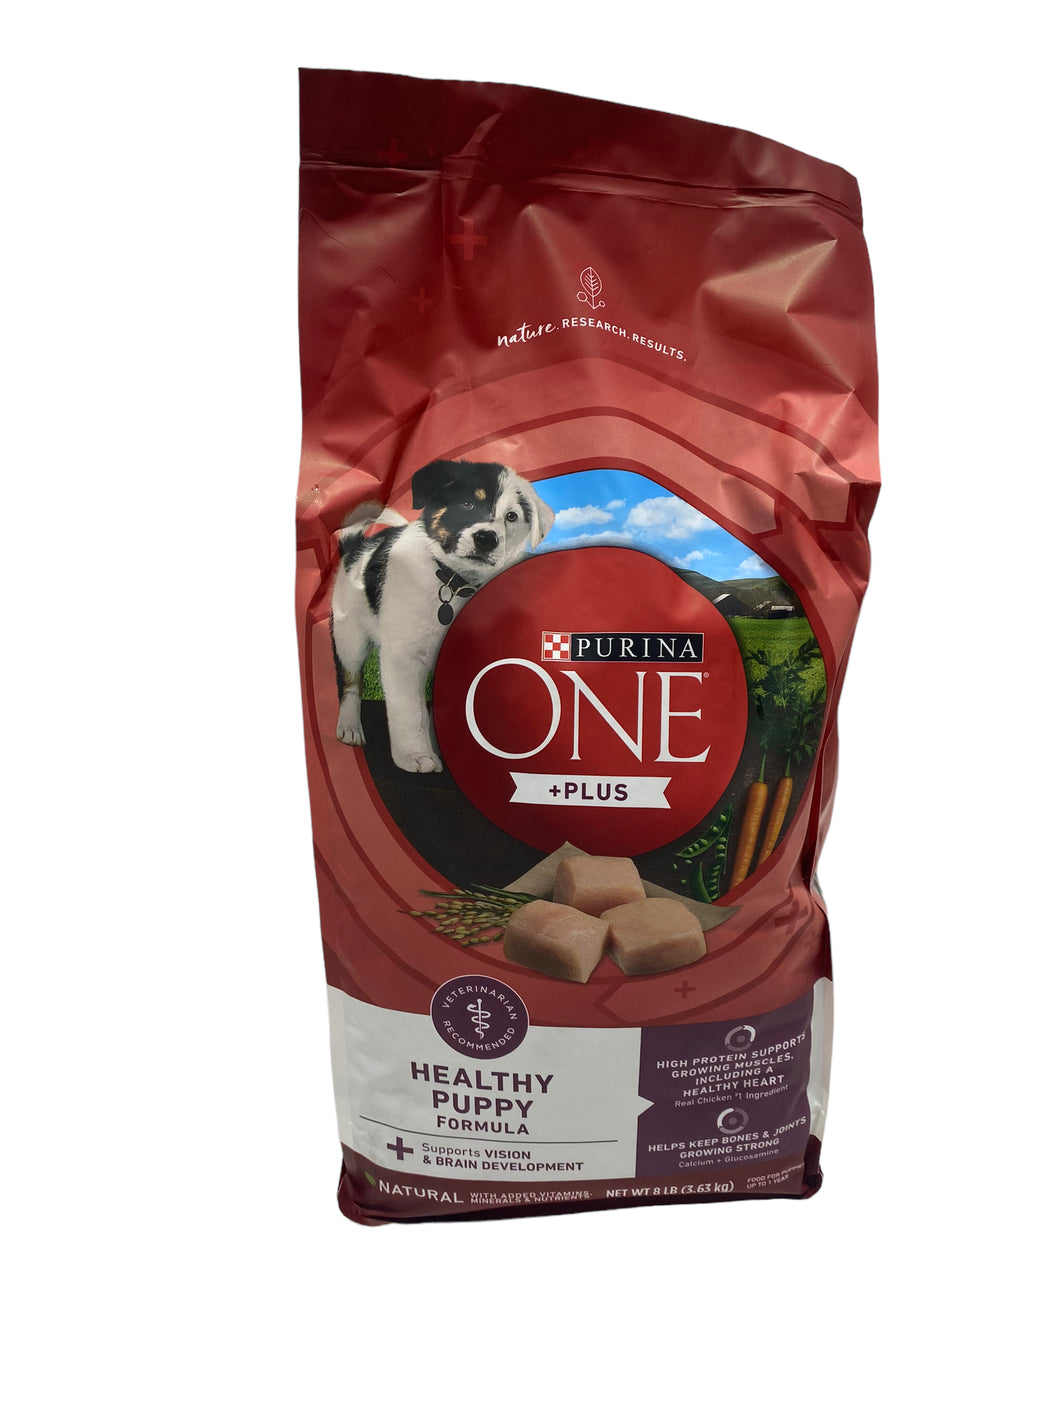 Purina One Healthy Puppy Chicken 8LBS STORE PICKUP ONLY - FreemanLiquidators - [product_description]